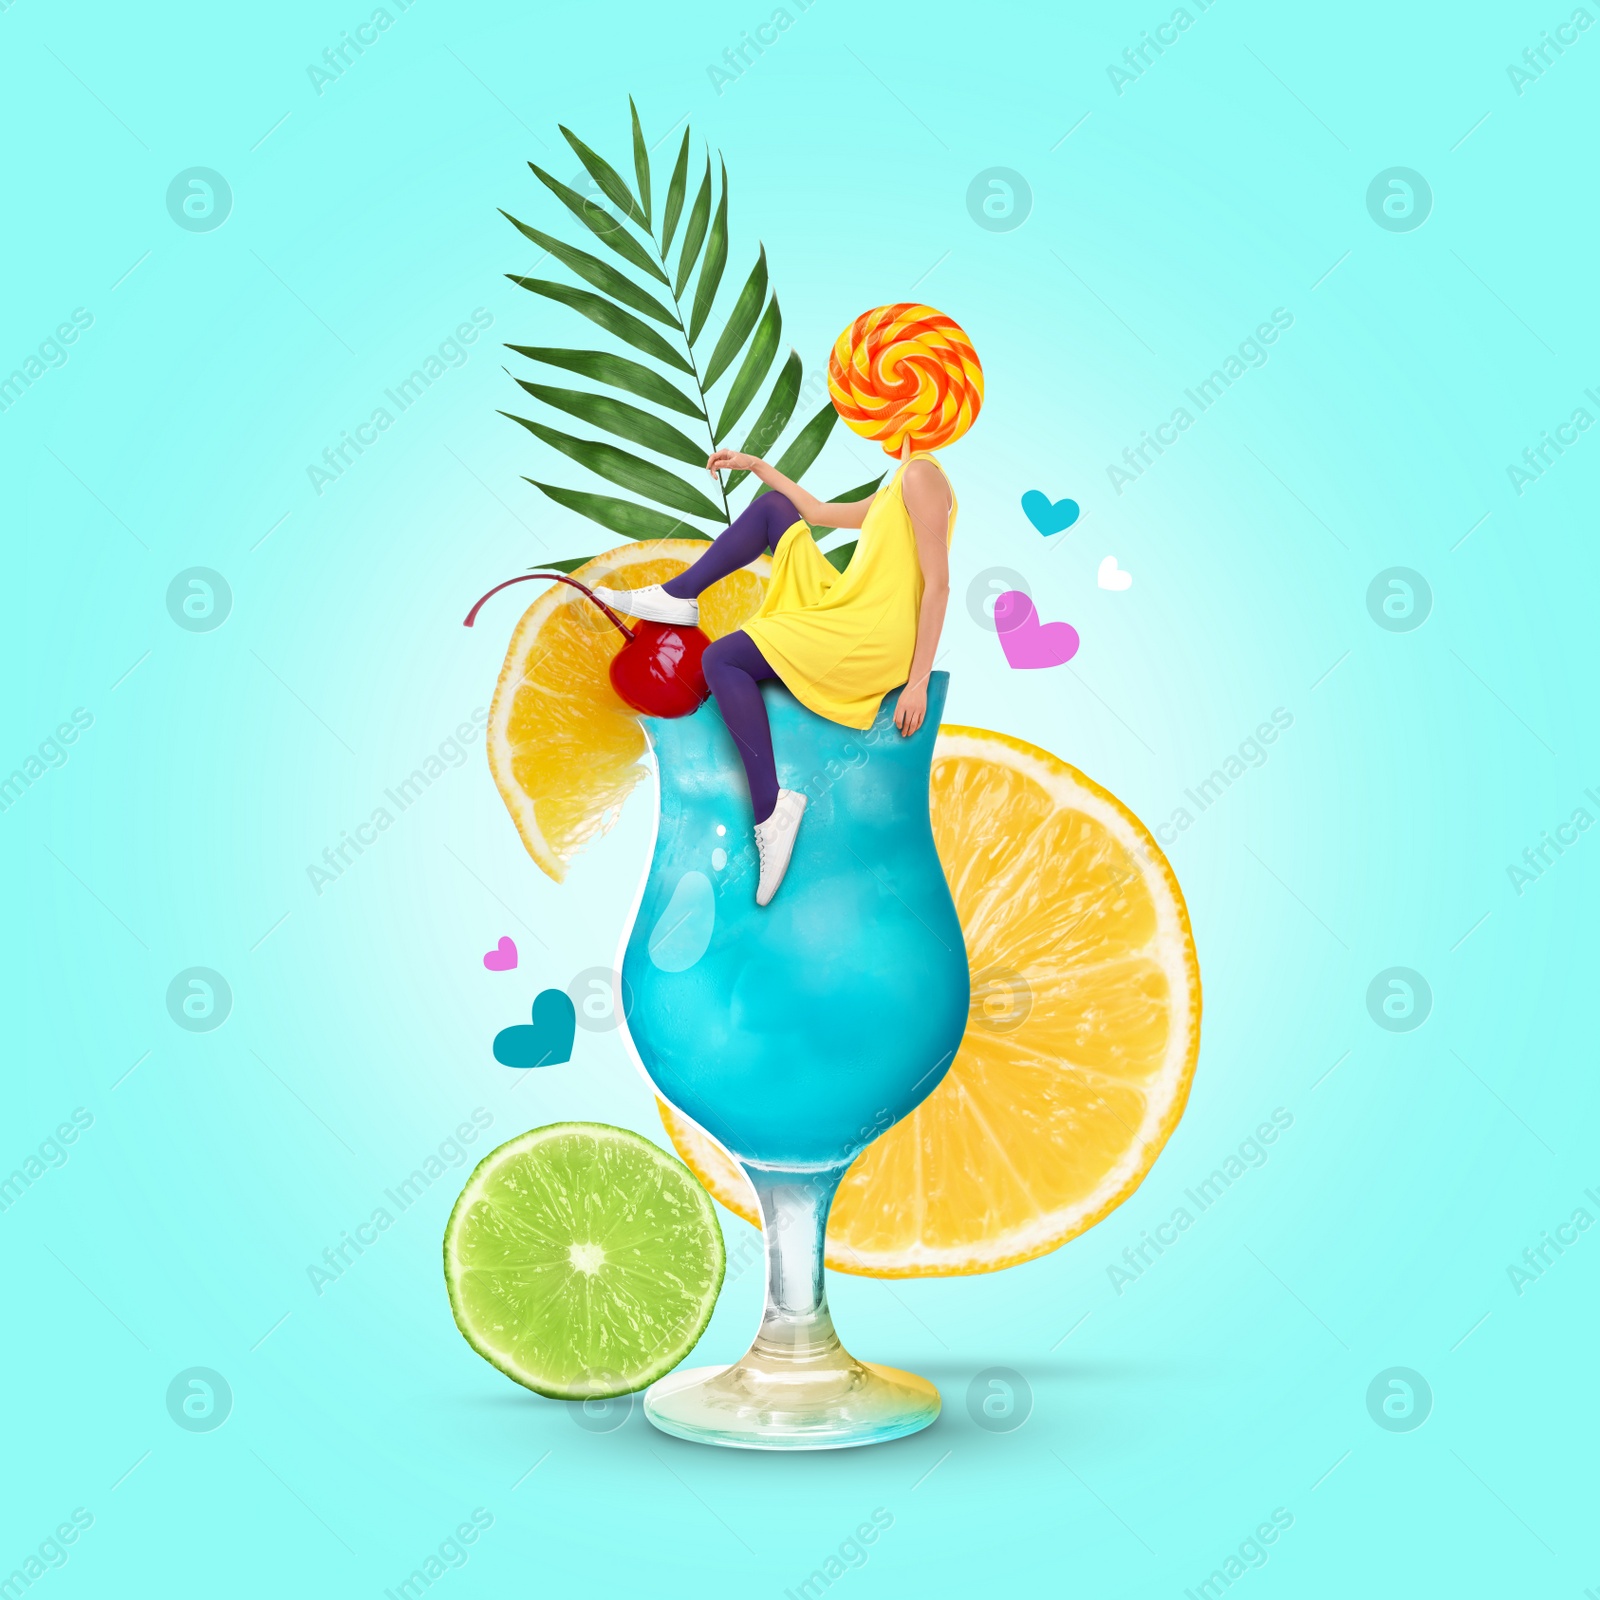 Image of Candy woman sitting on glass of cocktail against colorful background. Summer party concept. Stylish creative design